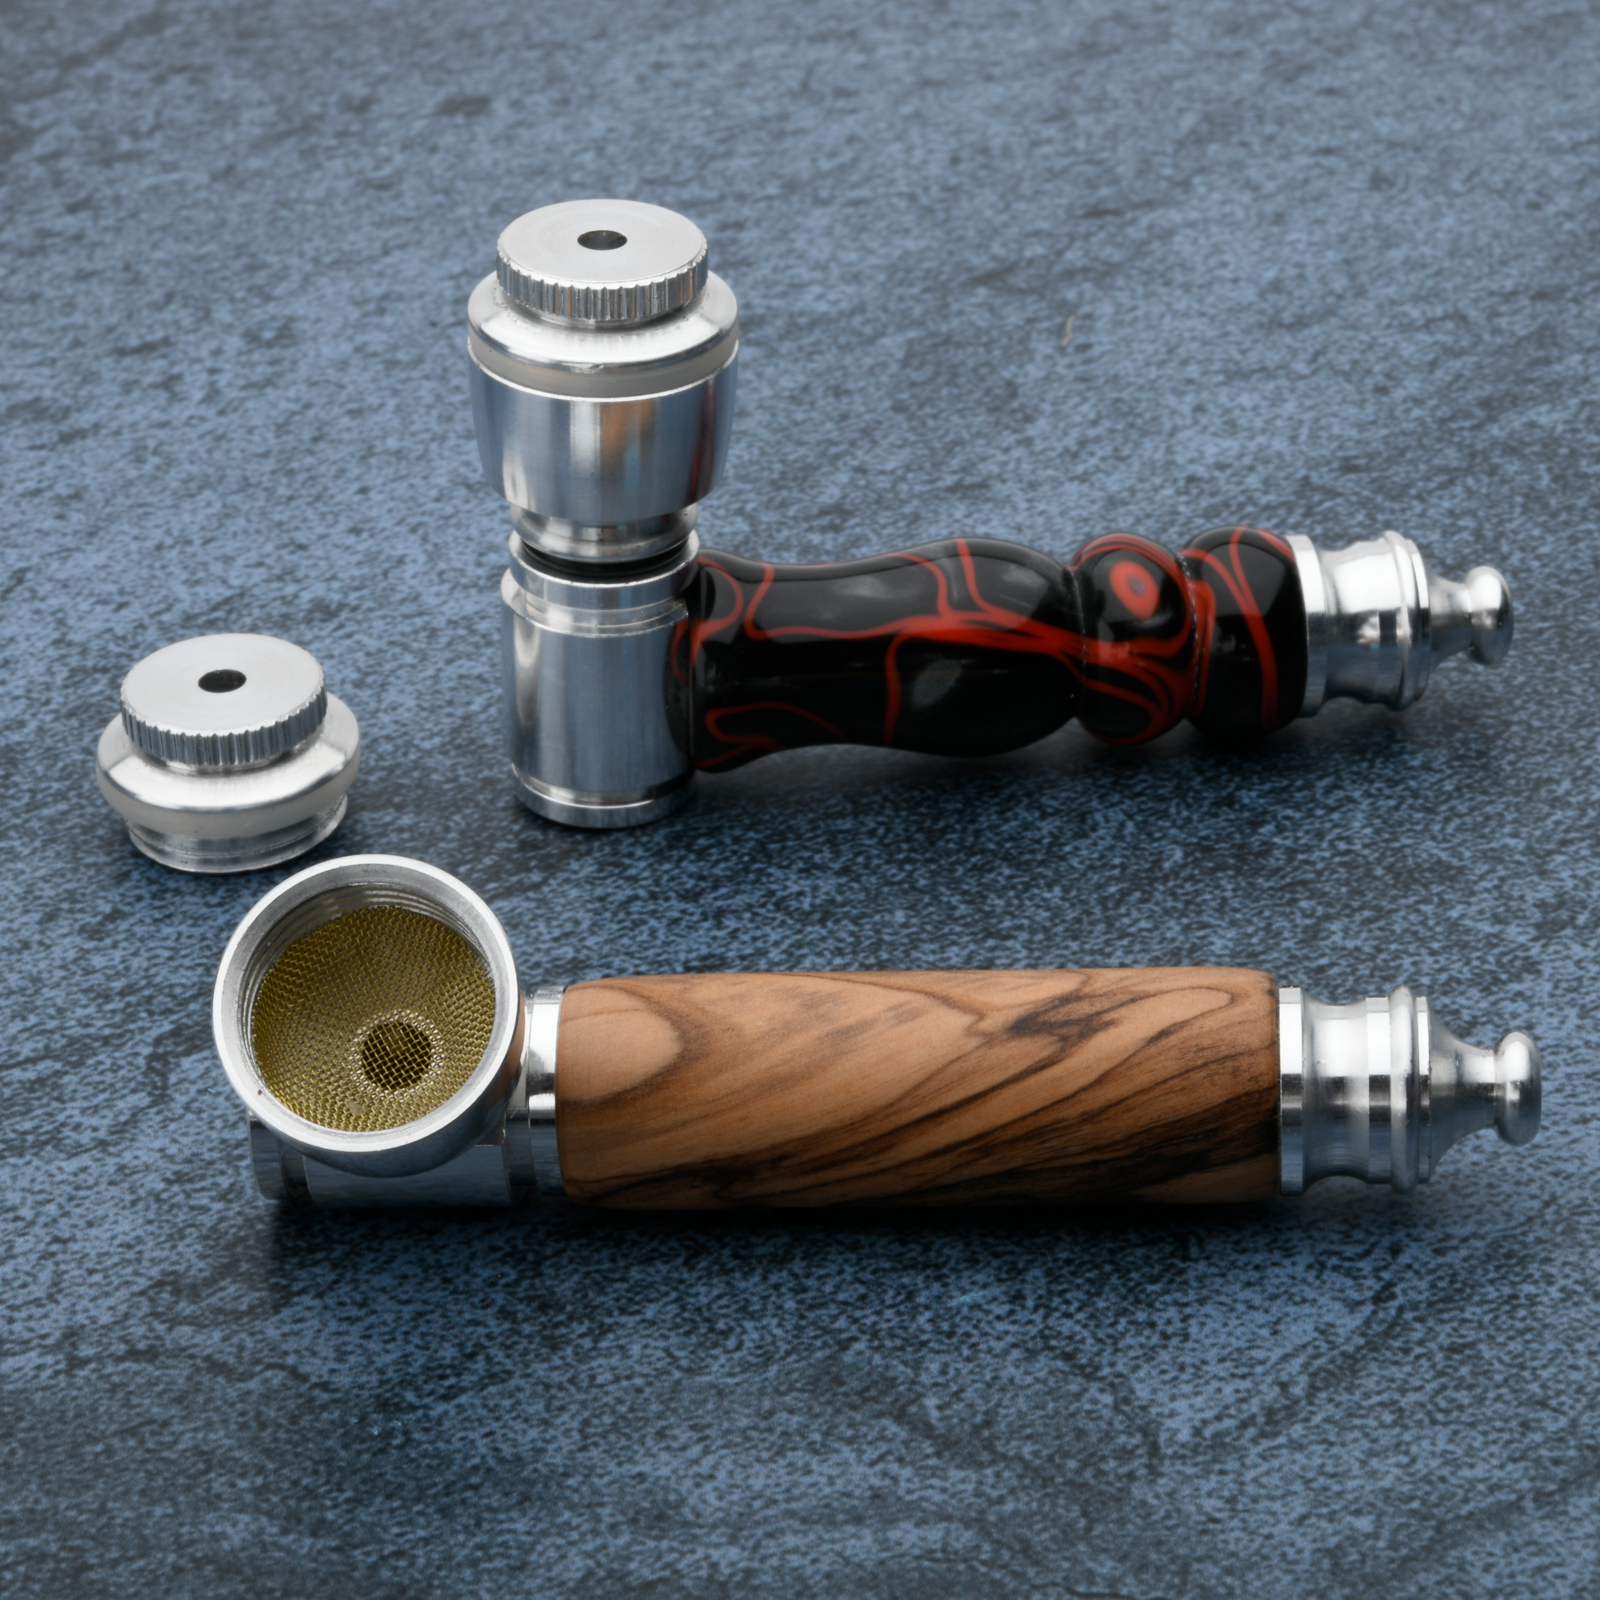 Cylinder Smoking Pipe With Grinder